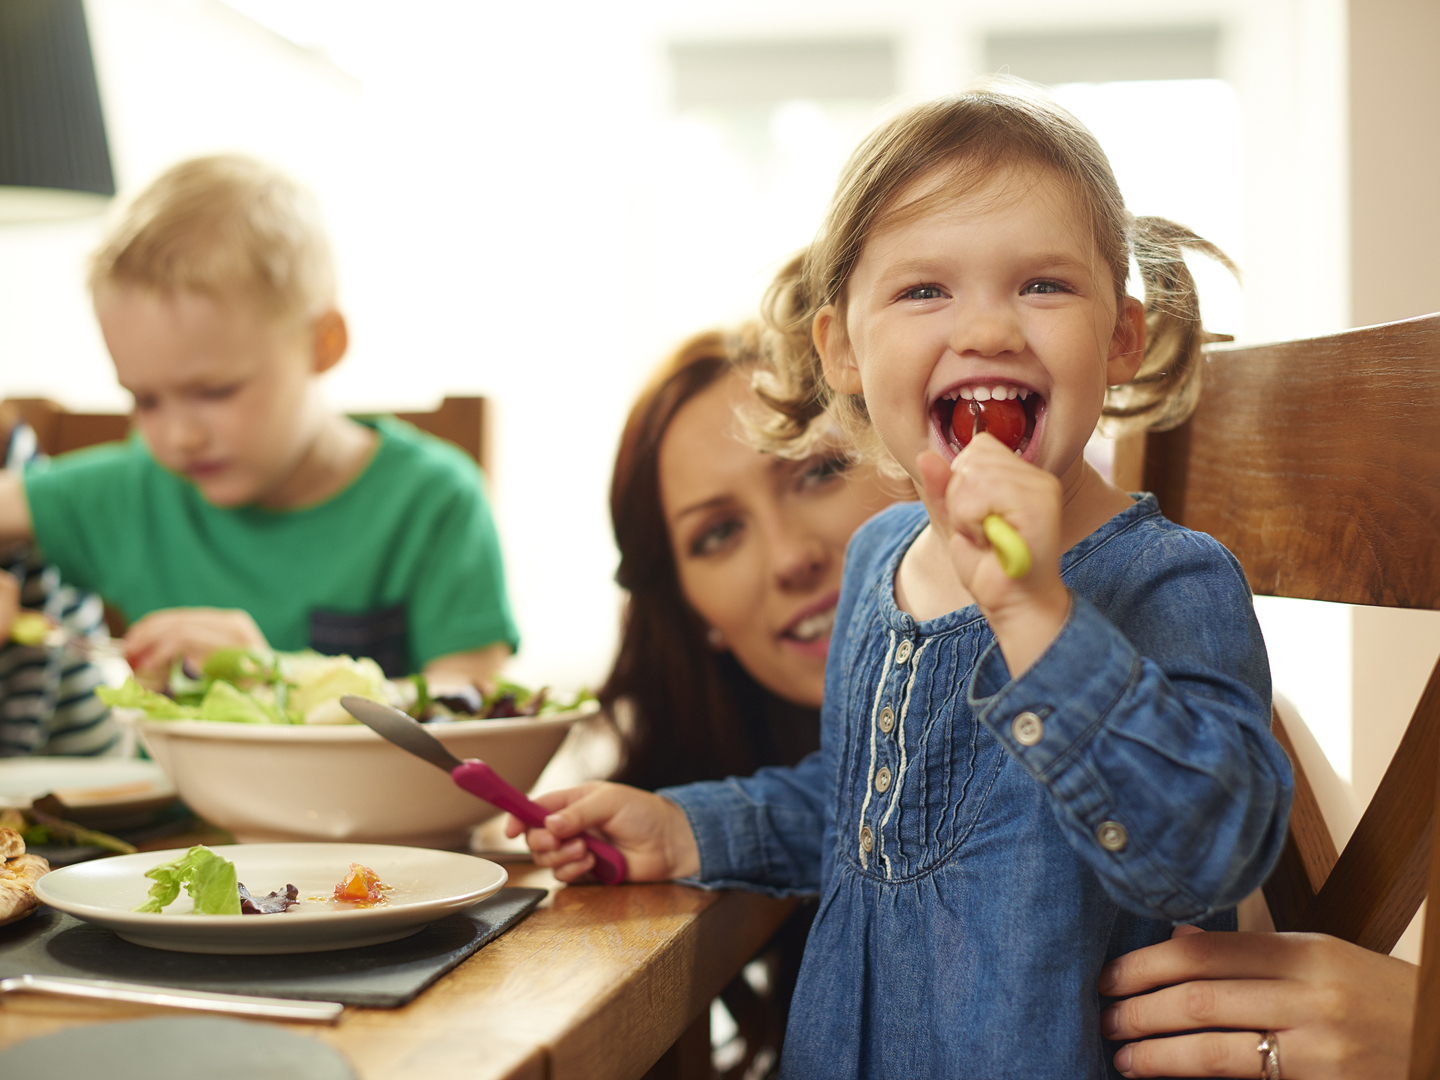 a young family of four sit at the dining table and eat pizza and salad.Mum helps her little girl with her meal , as she cheekily stuffs a whole tomato into her mouth .